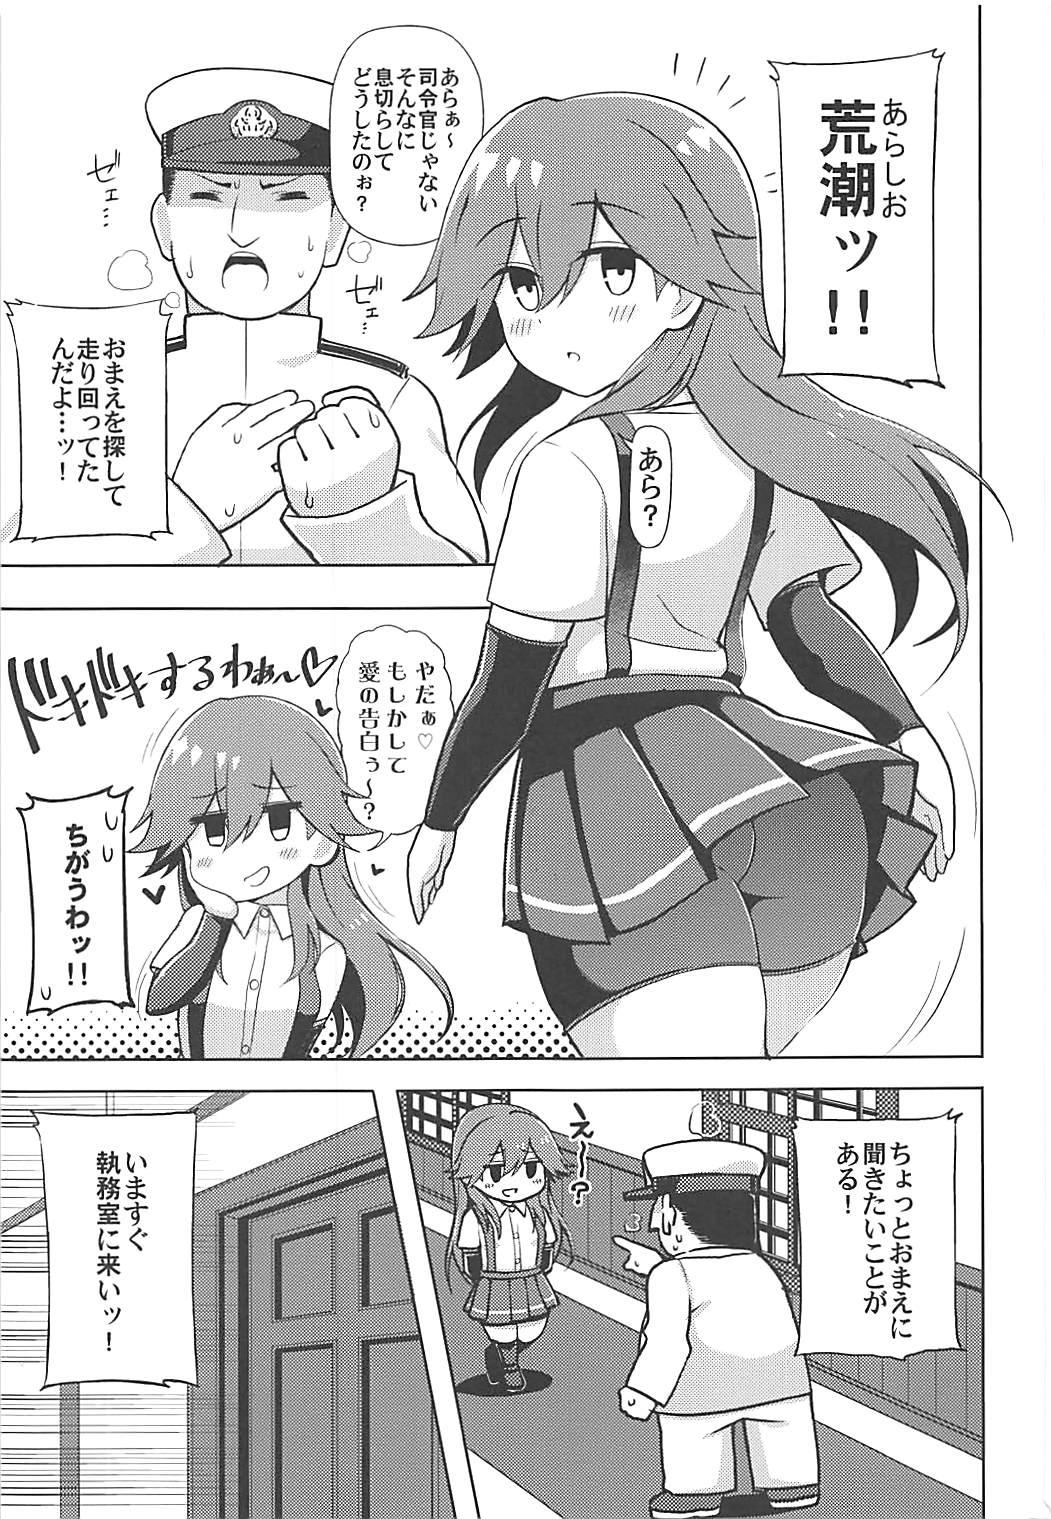 Sexteen Little Girl Sweet Trap! - Kantai collection Cosplay - Page 2